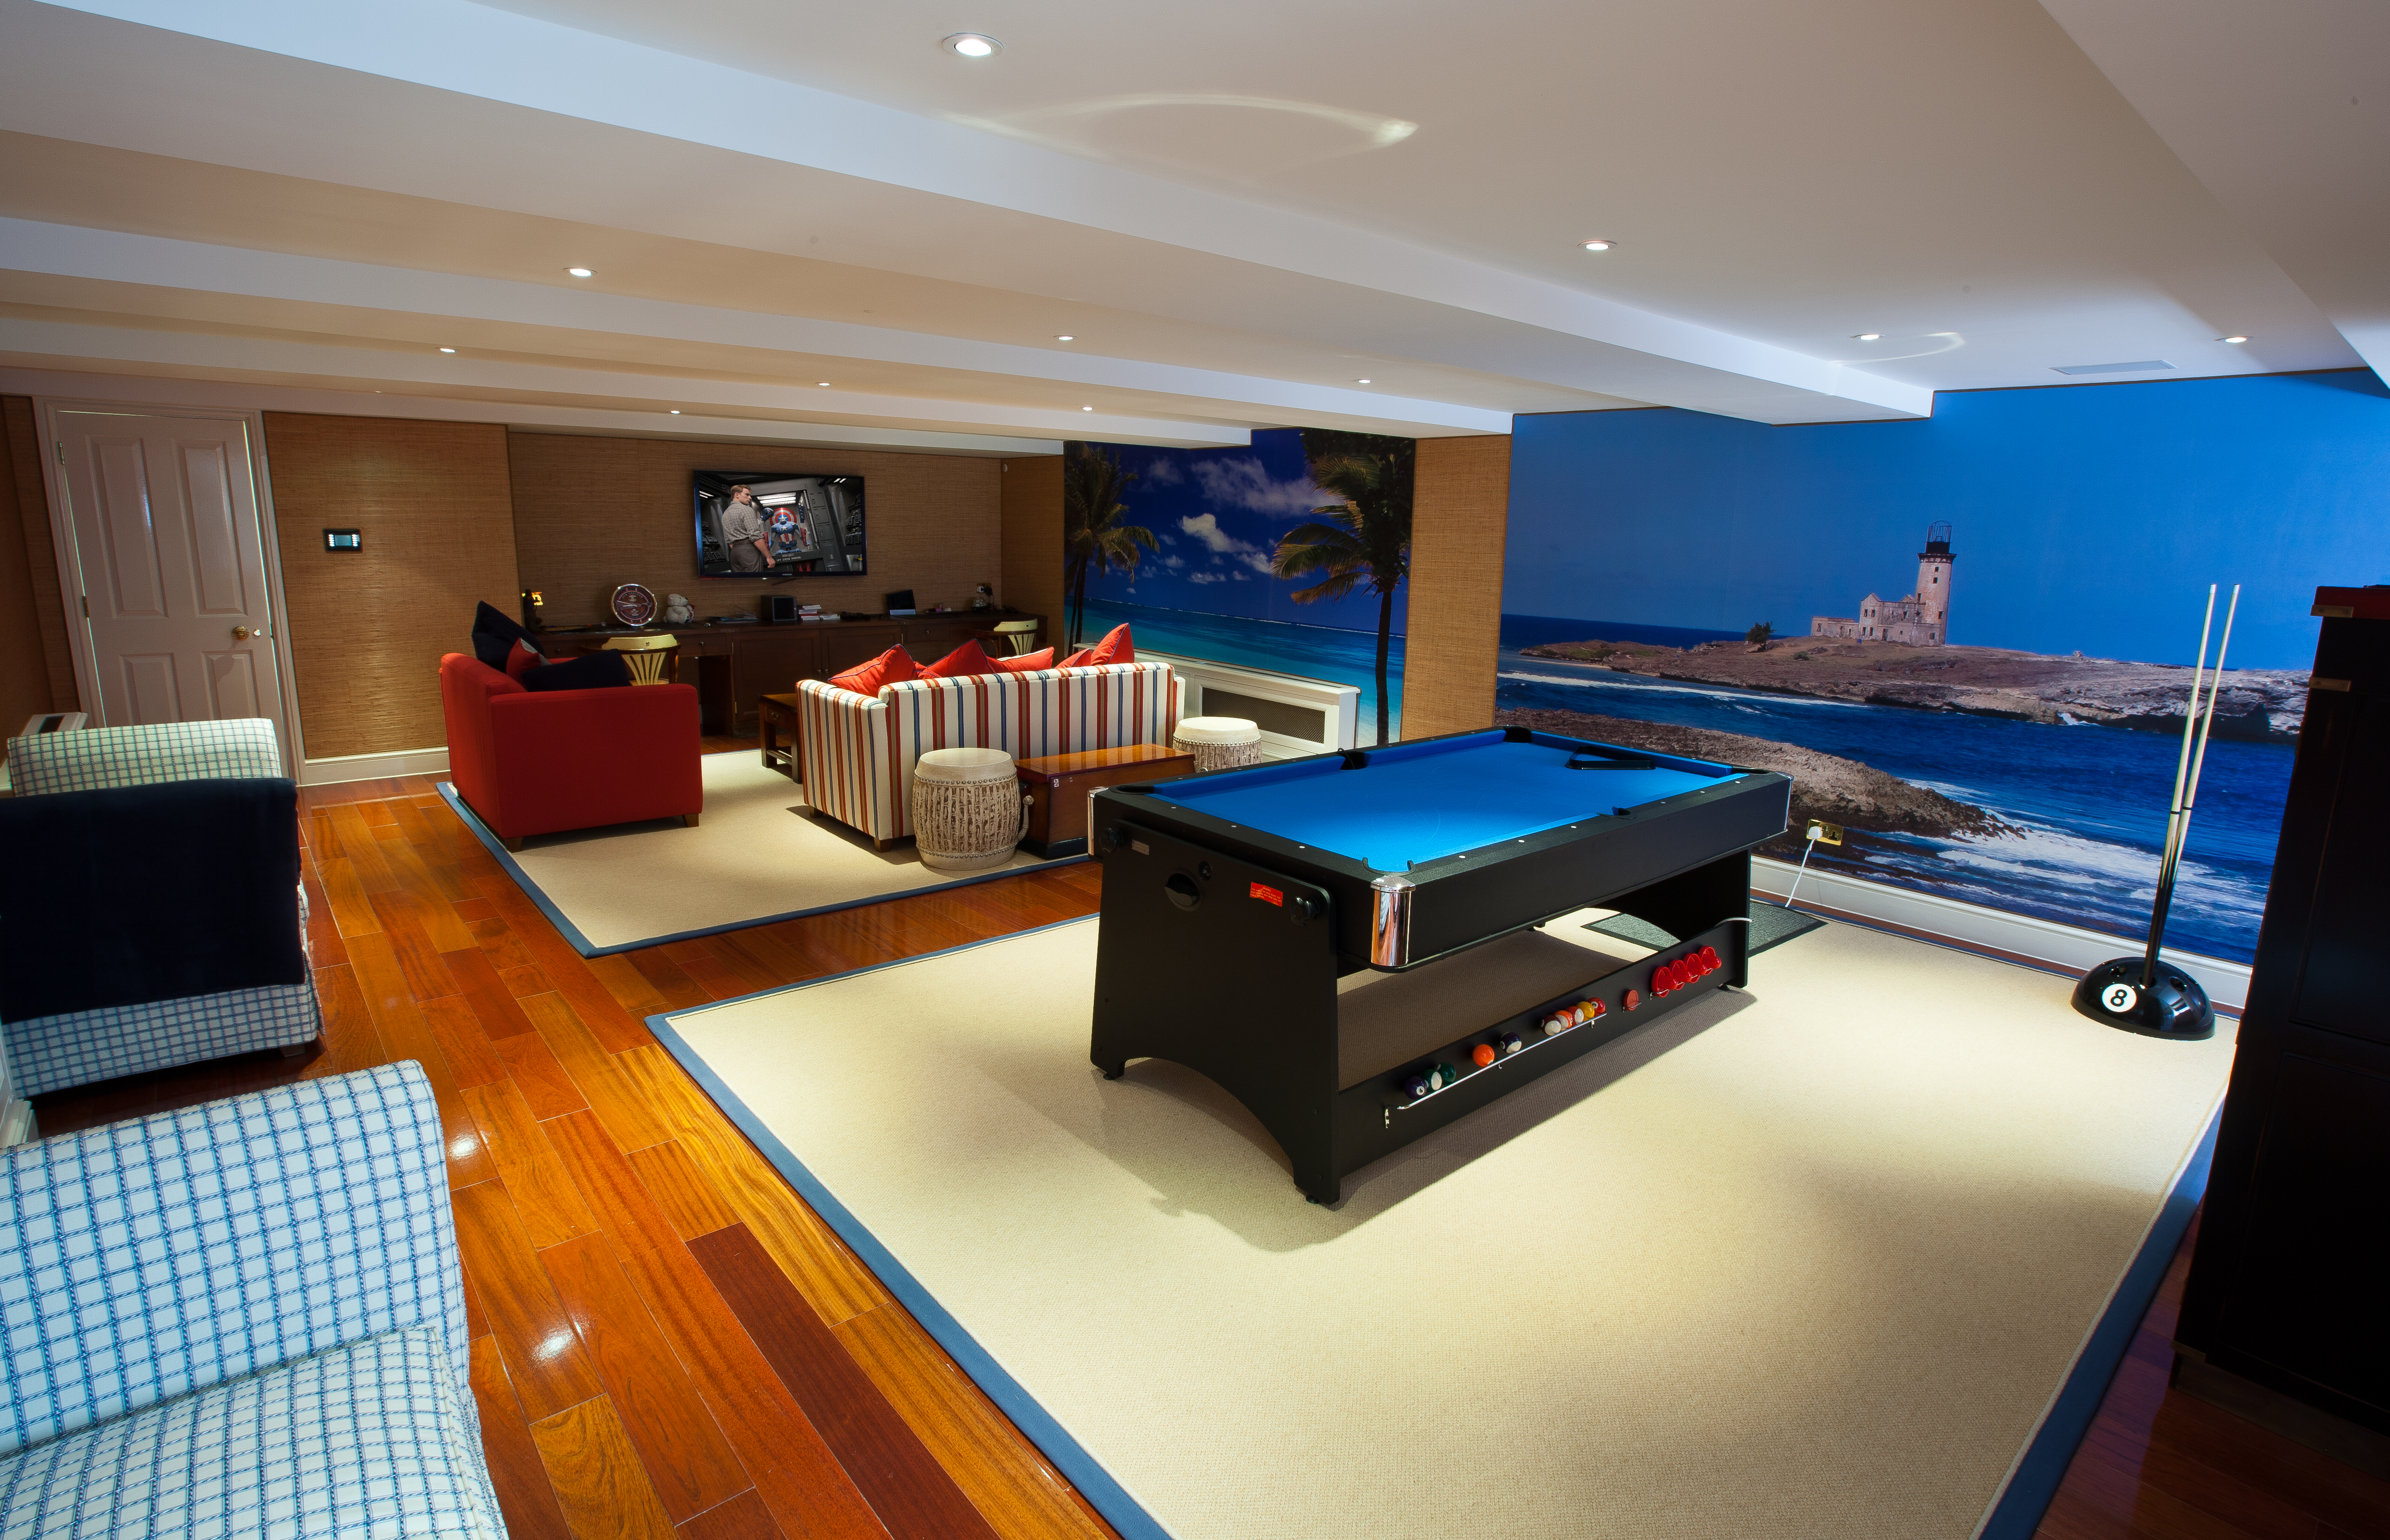 Games room, with TV media room and pool table.